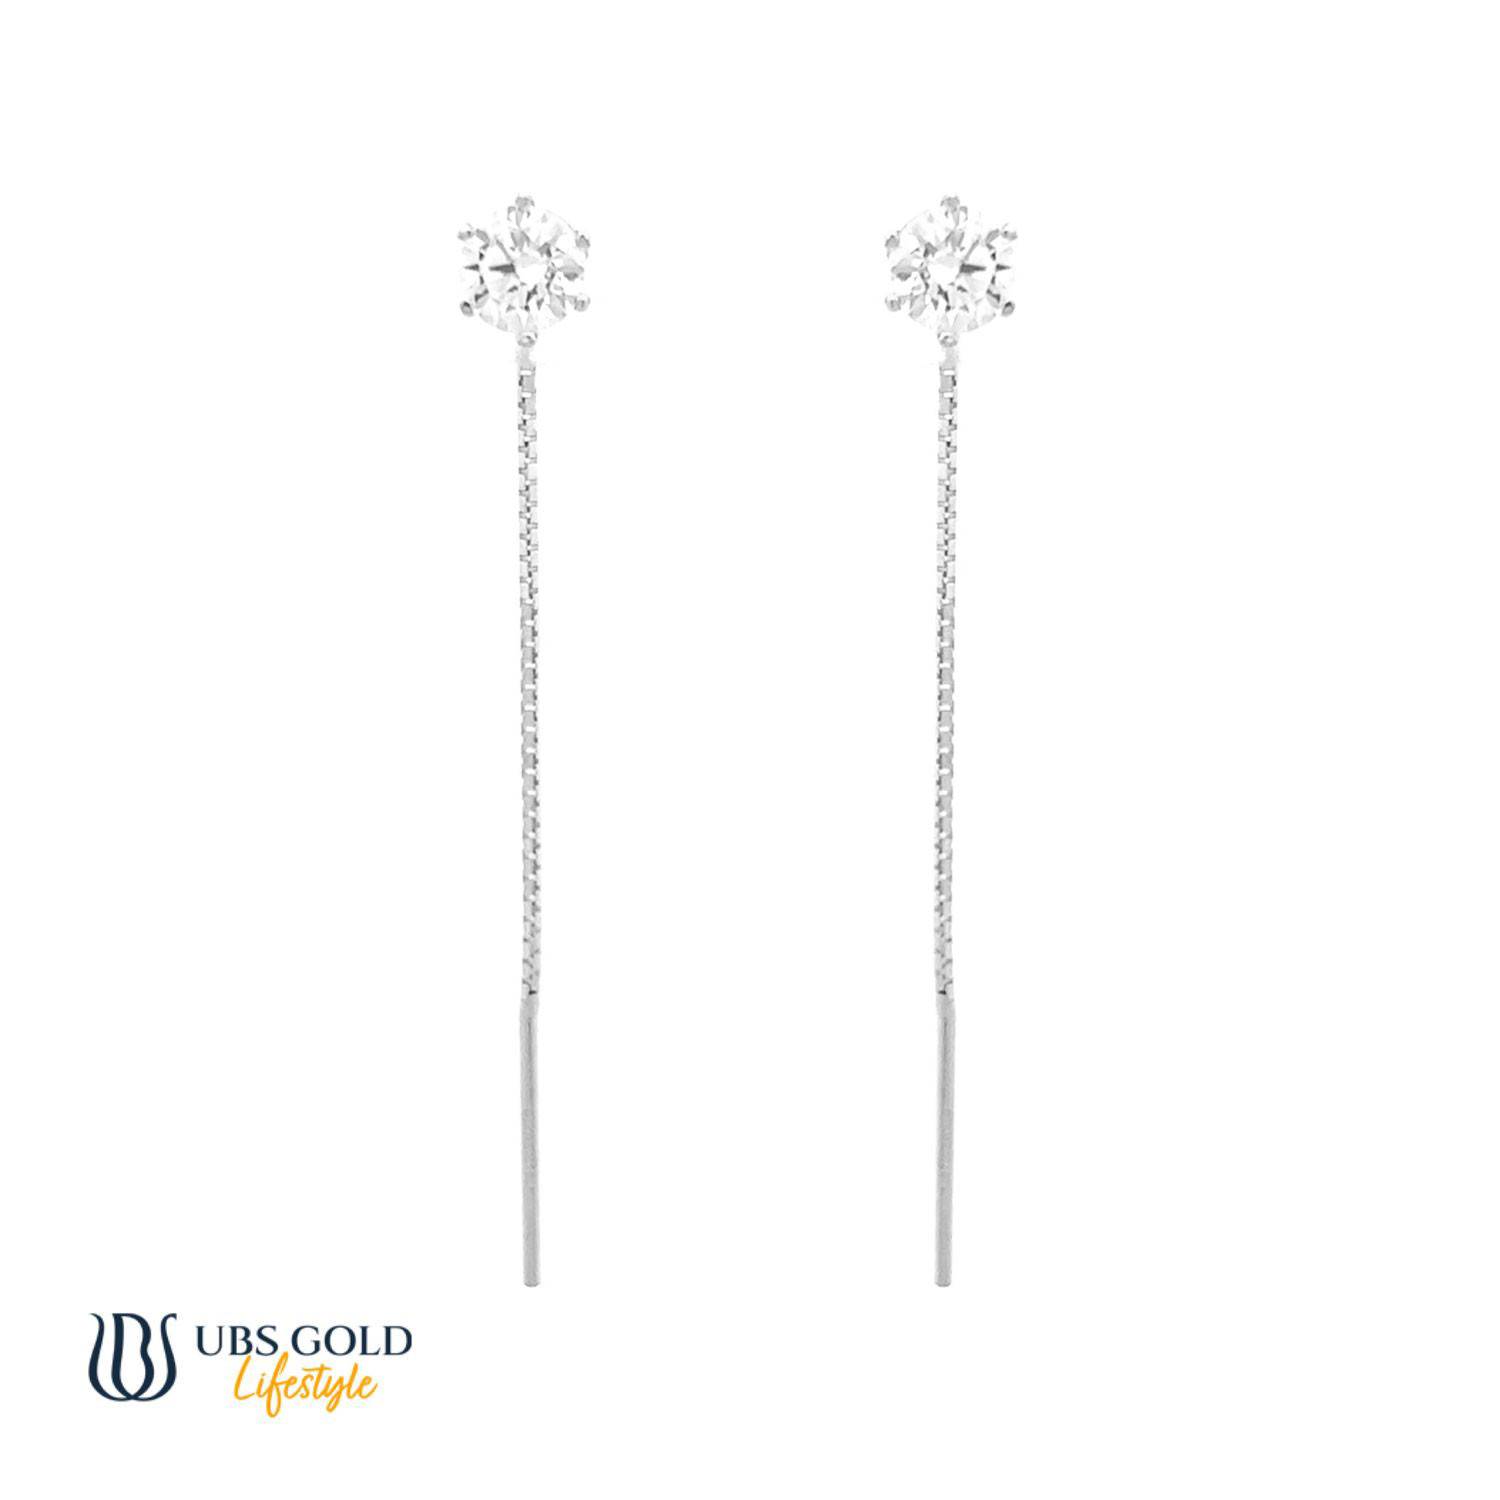 UBS Anting Emas Solitaire - Gwvm000019T - 17K